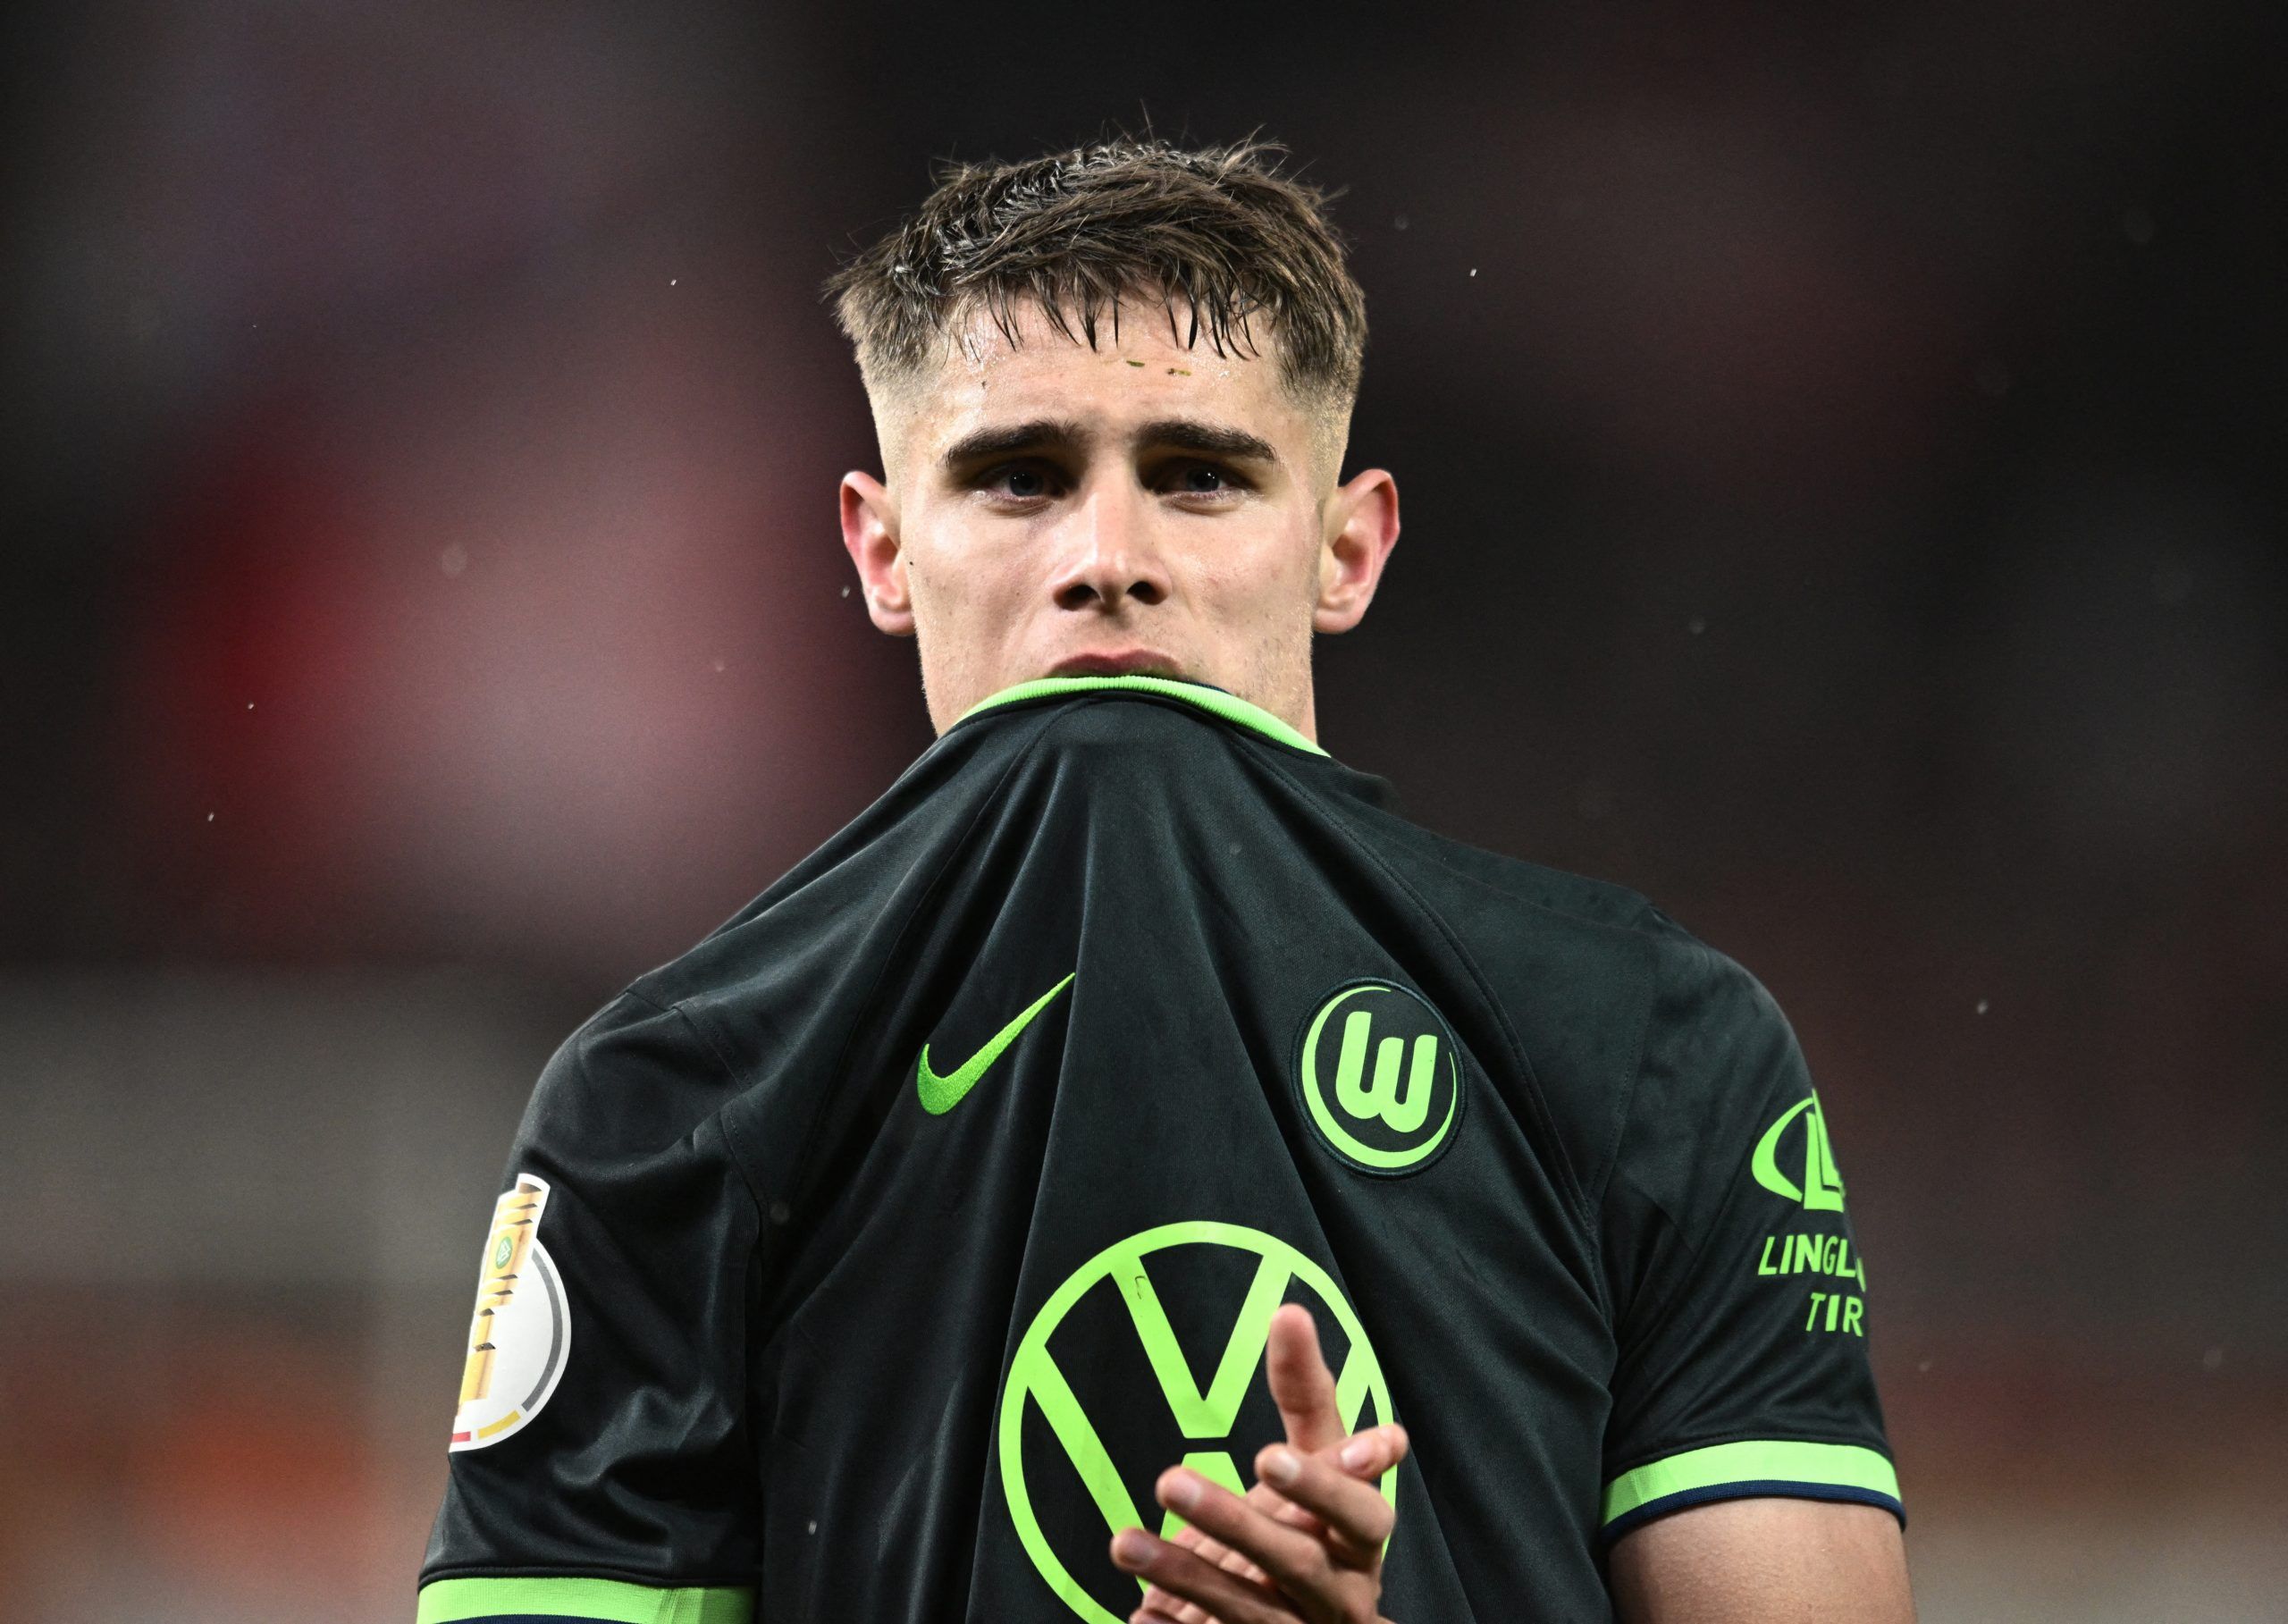 Soccer Football - DFB Cup - Round of 8 - 1. FC Union Berlin v VfL Wolfsburg - Stadion An der Alten Forsterei, Berlin, Germany - January 31, 2023 VfL Wolfsburg's Micky van de Ven looks dejected after the match REUTERS/Annegret Hilse DFB REGULATIONS PROHIBIT ANY USE OF PHOTOGRAPHS AS IMAGE SEQUENCES AND/OR QUASI-VIDEO.